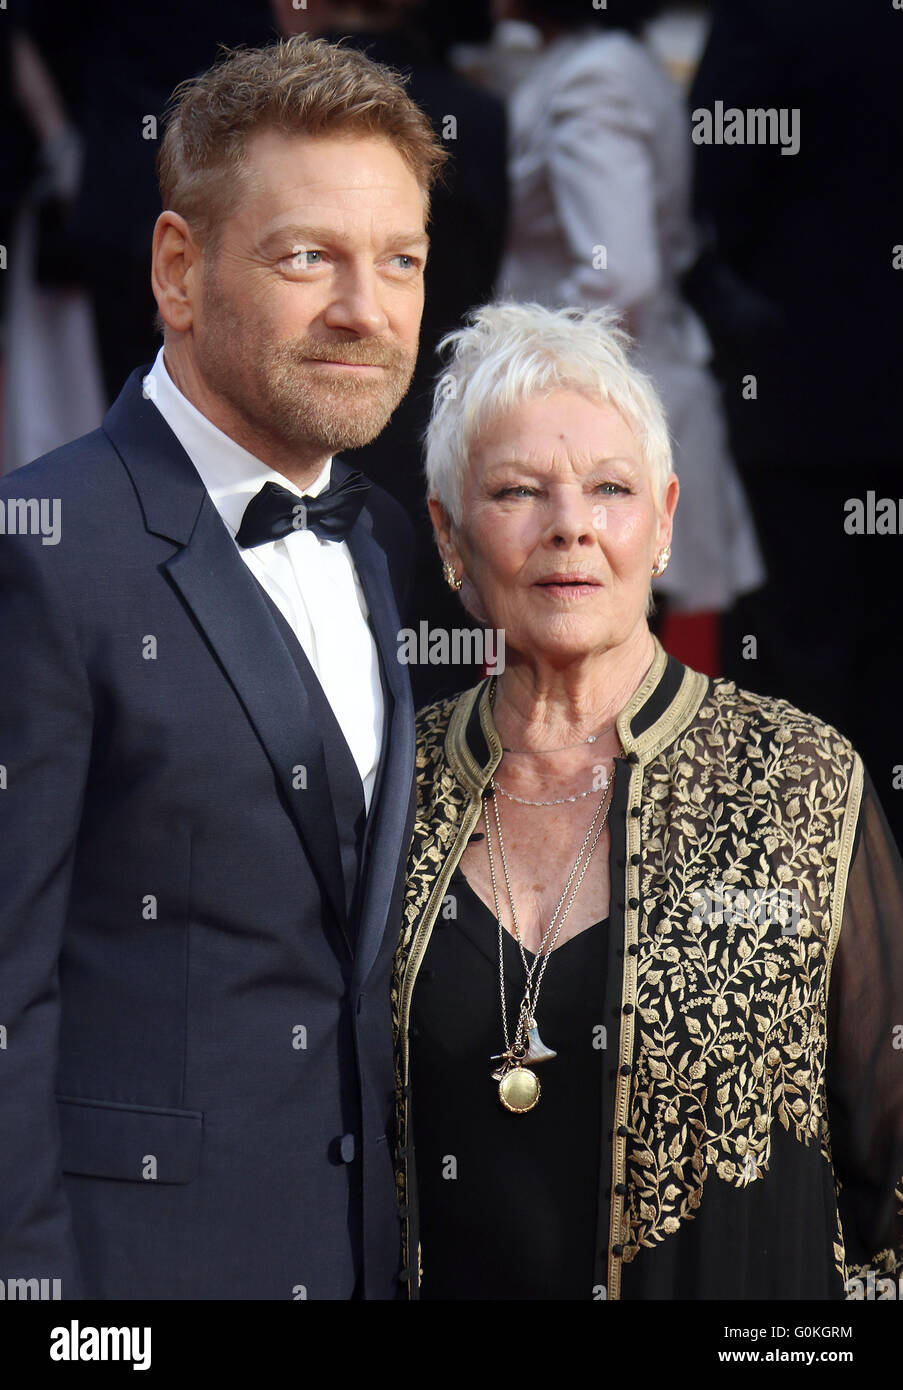 3 aprile 2016 - Sir Kenneth Branagh e Dame Judi Dench frequentando il Olivier Awards 2016 at Royal Opera House Covent Garden in Foto Stock